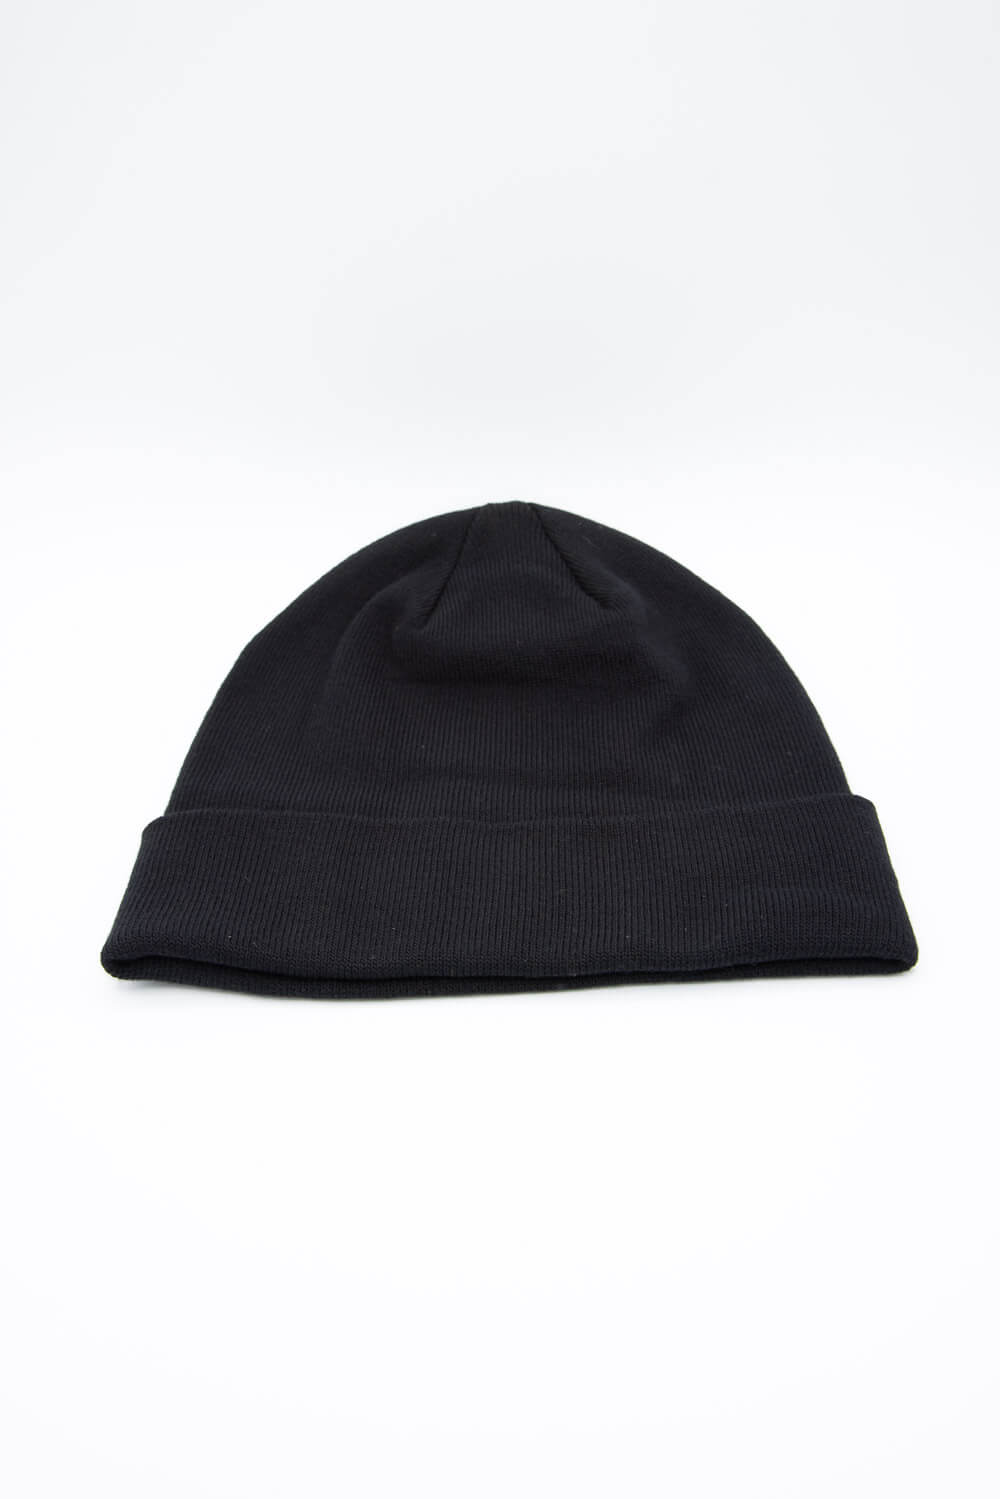 Hats The North Face Dock Worker Recycled Beanie Black